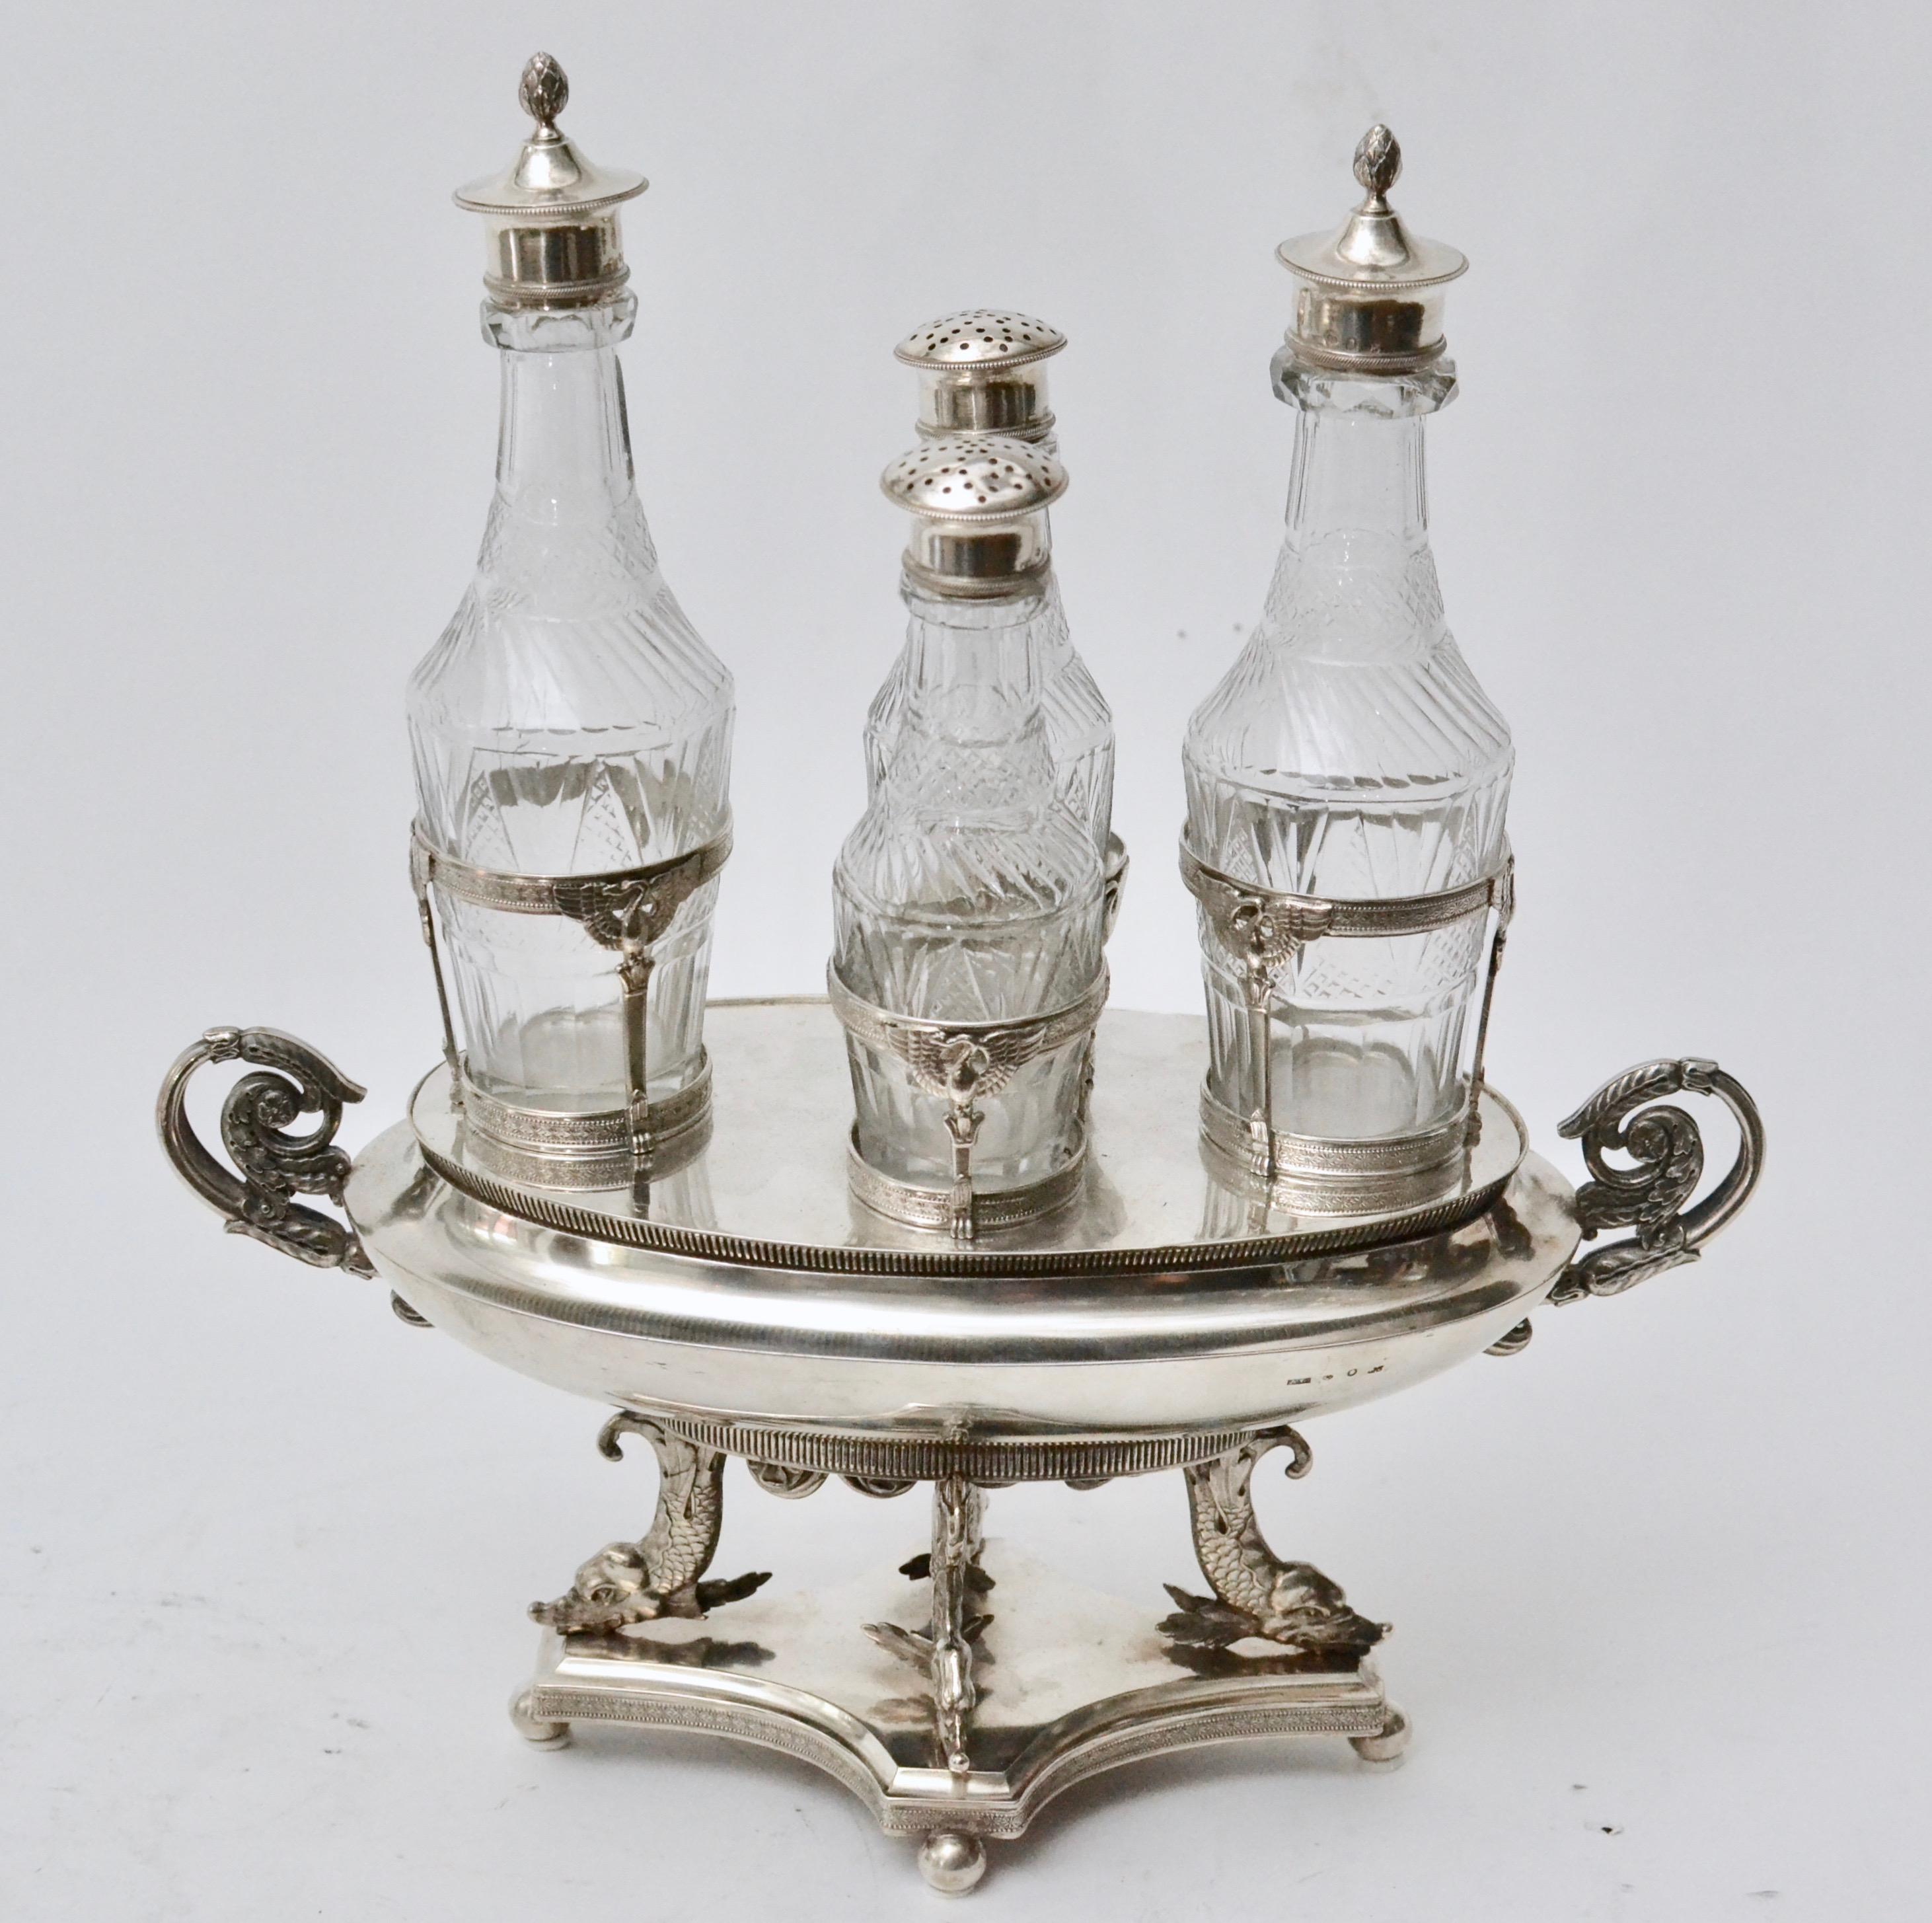 A Swedish Empire silver cruet by Anders Lindqvist, Stockholm (1789-1856). Dated 1822.